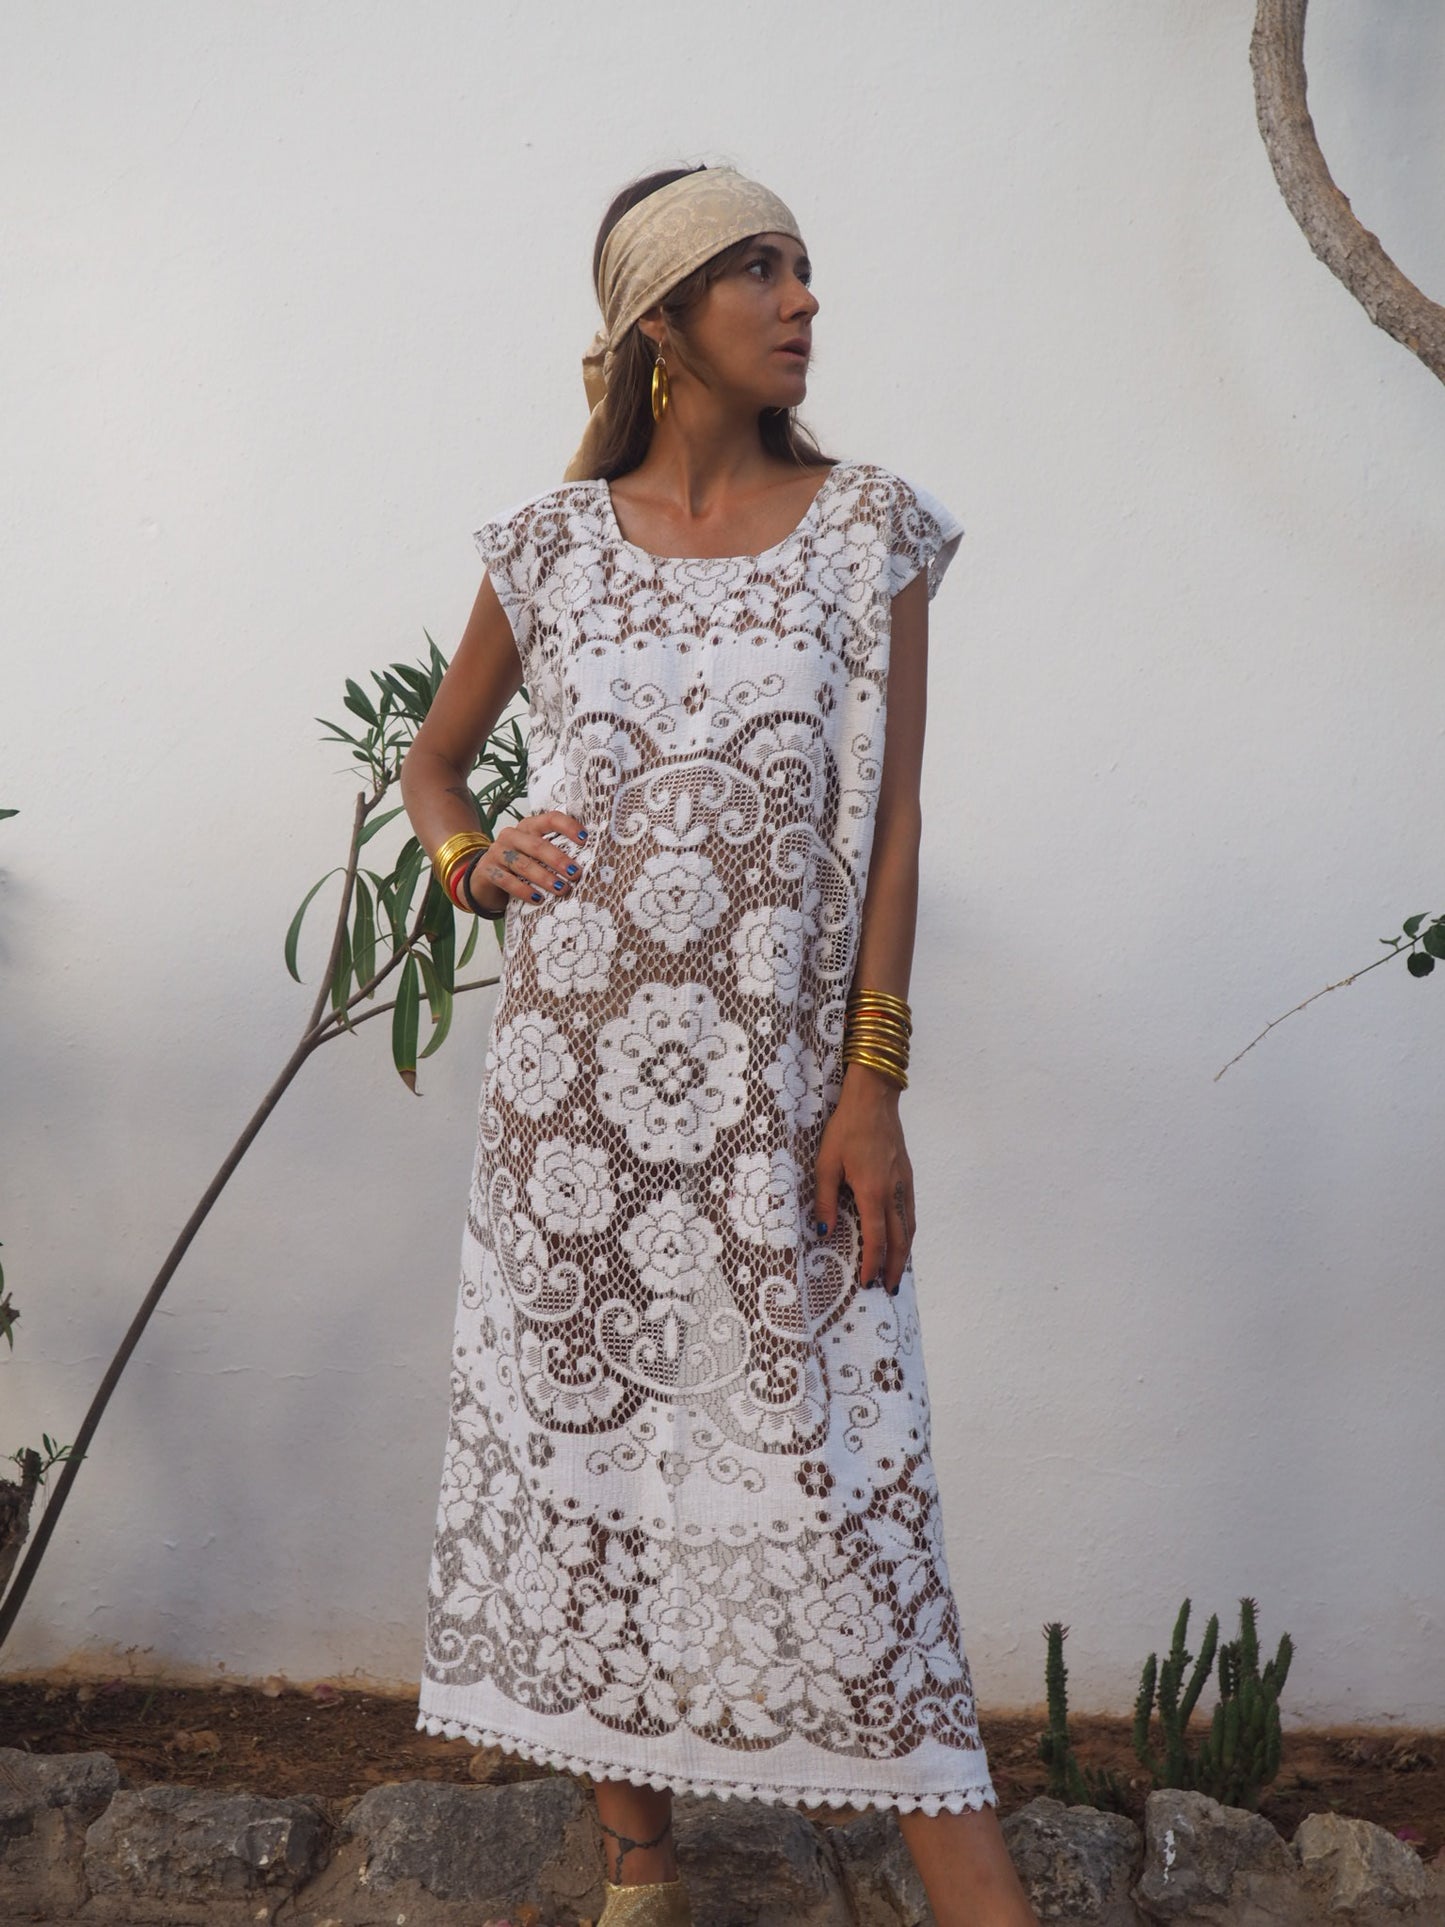 Amazing one off a kind white vintage lace dress up-cycled by Vagabond Ibiza